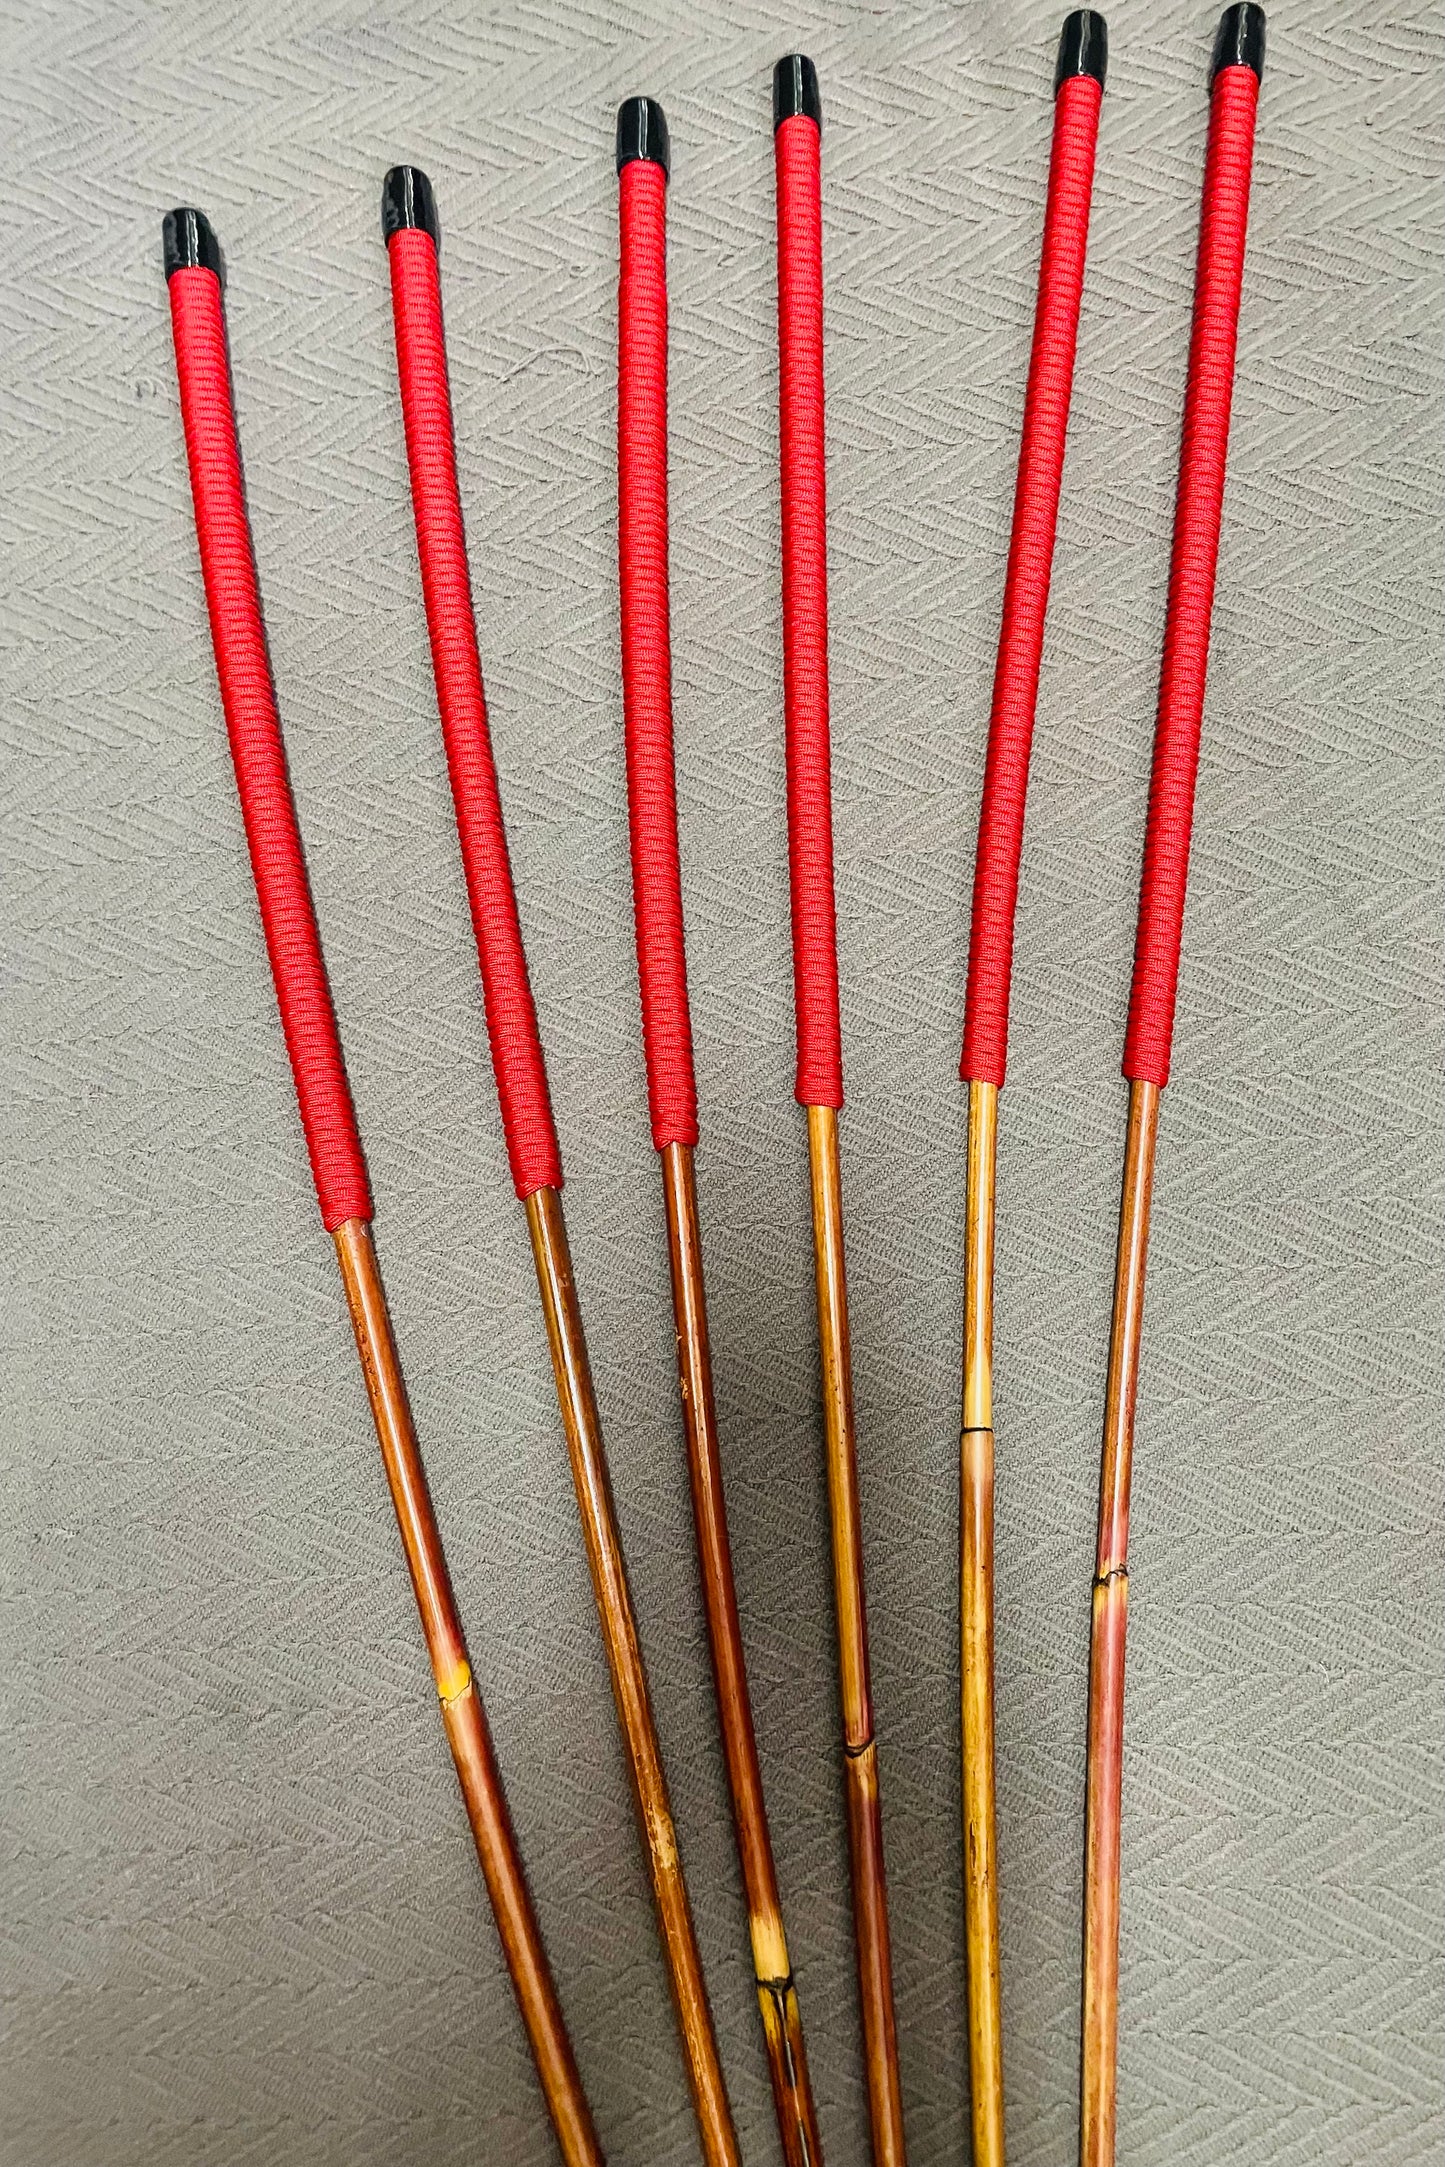 Smoked Dragon Canes SELECT Six / Dark Dragon Canes - 95 to 98 cms Length - Imperial Red Paracord Handles - Englishvice Canes